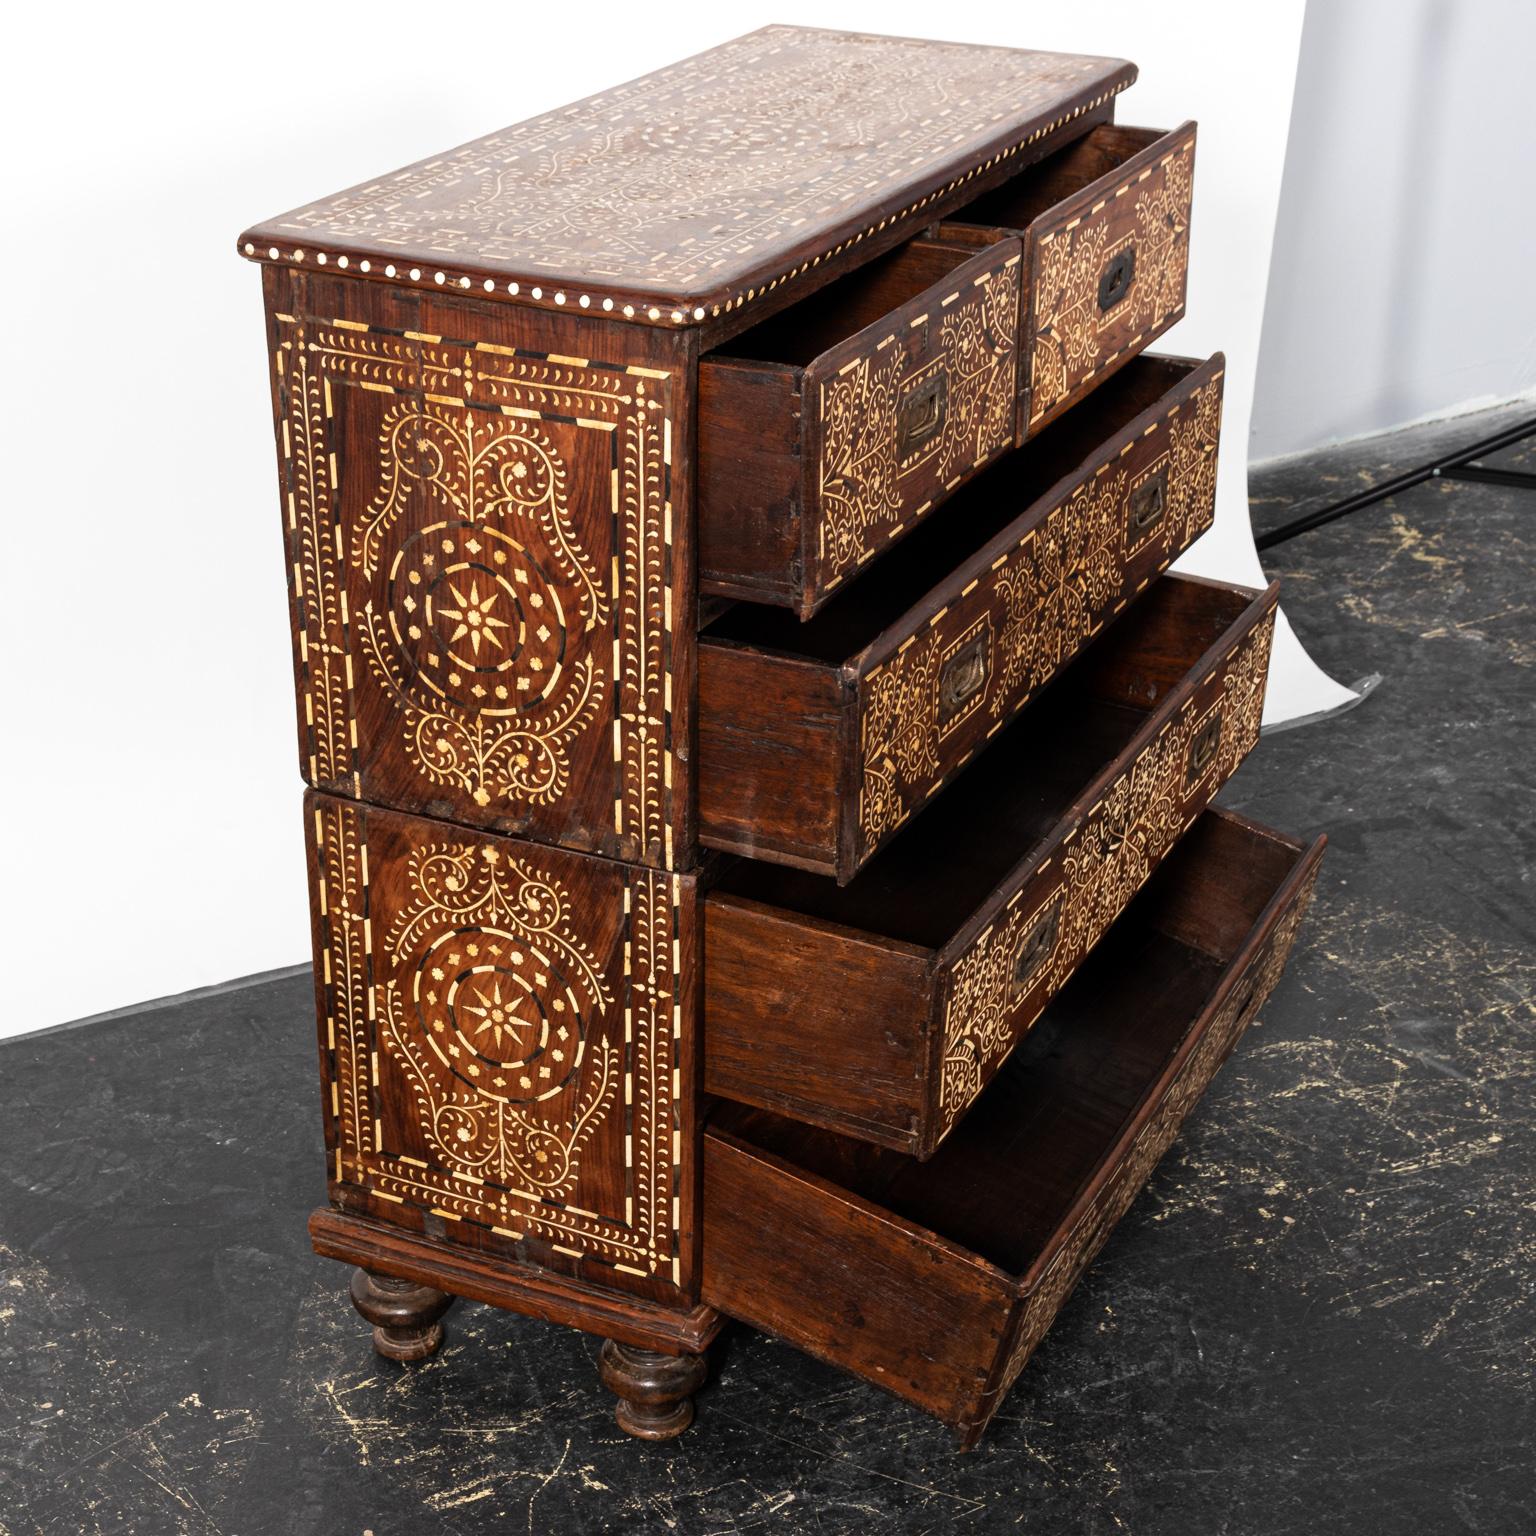 Wood and bone inlaid campaign chest with geometric detail throughout. The piece also features metal hardware. Please note of wear consistent with age including minor finish loss along with minor oxidation and patina to the metal hardware.